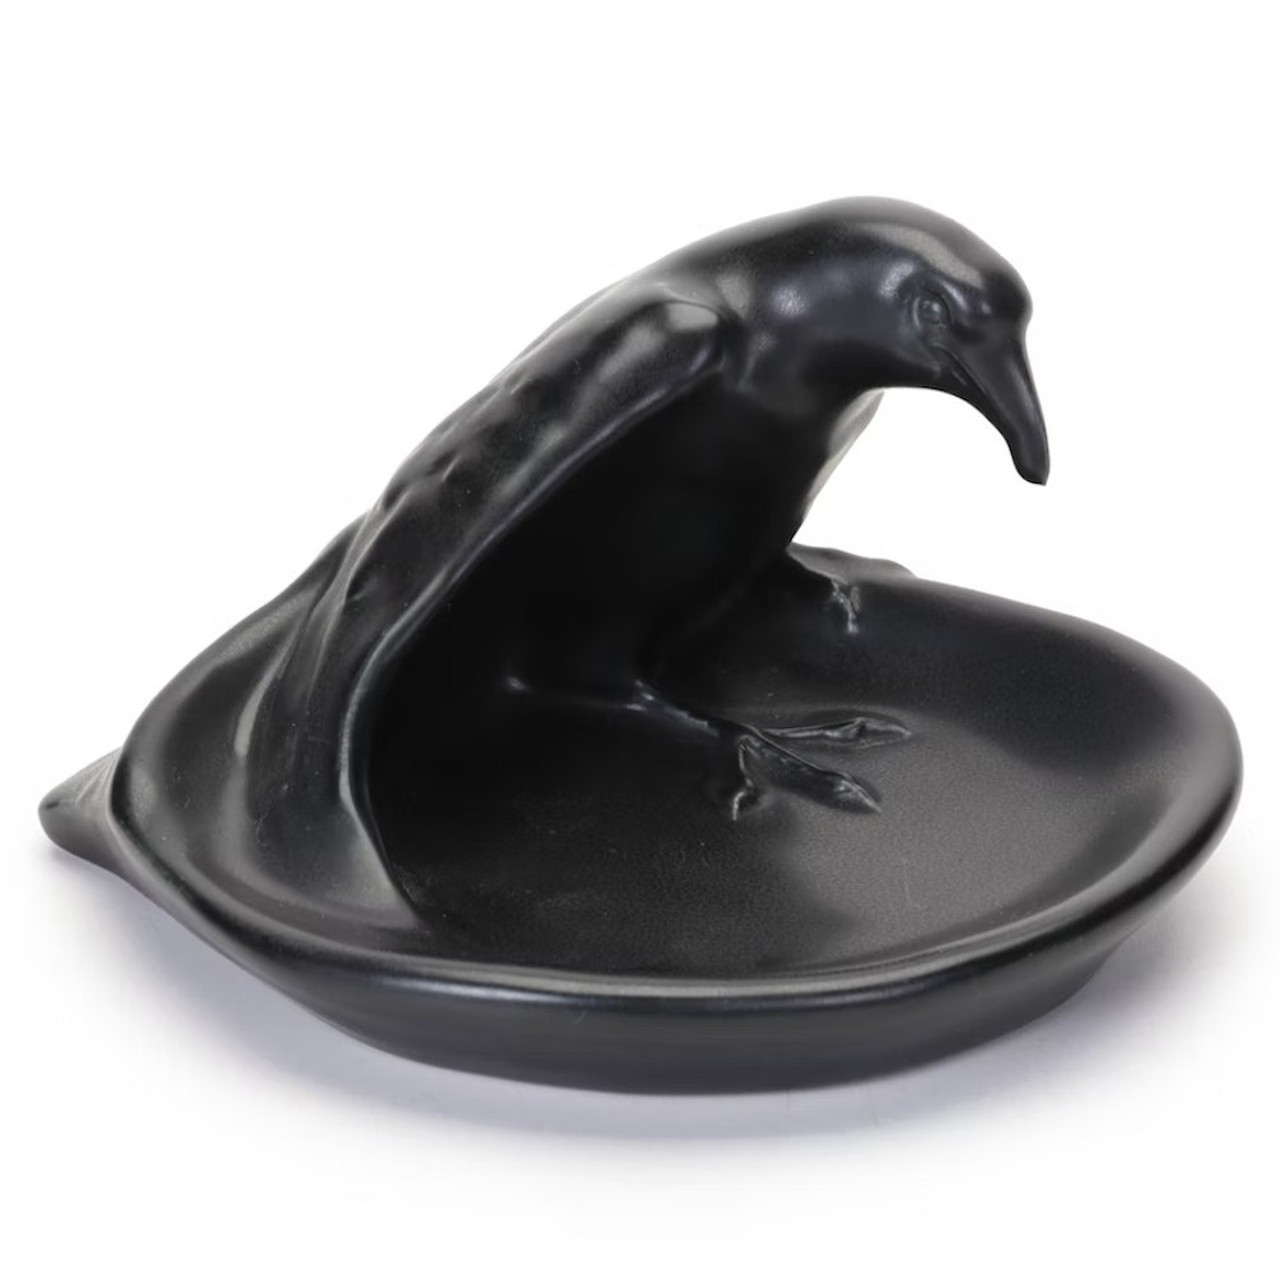 Rookwood Pottery Matte Black Raven Pin Dish, 1939
“Once upon a midnight dreary…” that’s how The Night Before Christmas starts, right? Your most gothic friend needs this 1939 Rookwood Pottery raven pin dish with a gorgeous matte black finish. We suggest leaving Santa a cookie under the bird’s open wing.